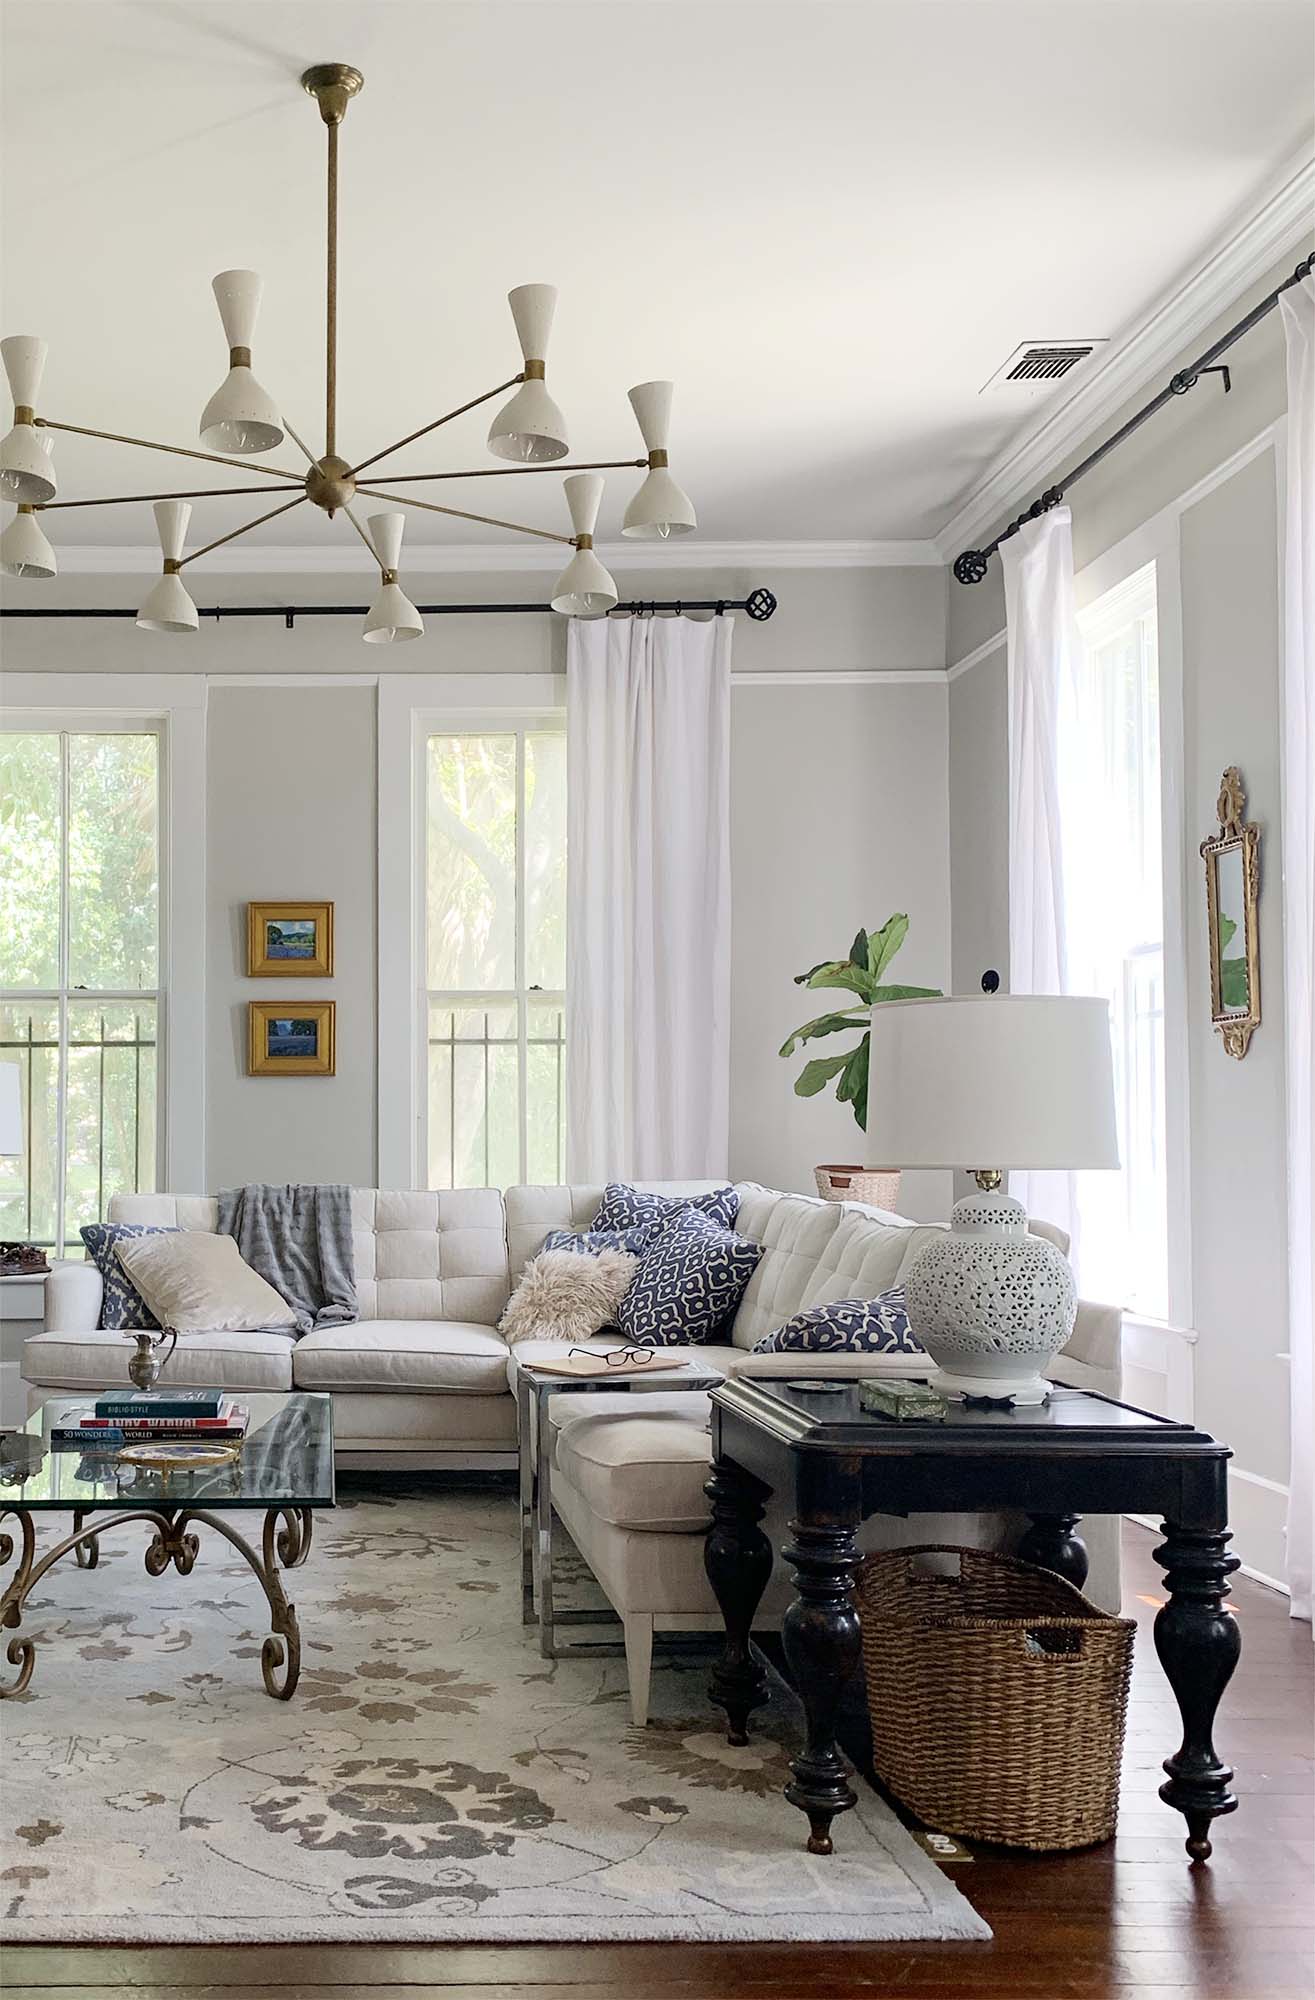 living-room-walls-and-ceiling-painted-in-sherwin-williams-agreeable-gray-paper-moon-painting